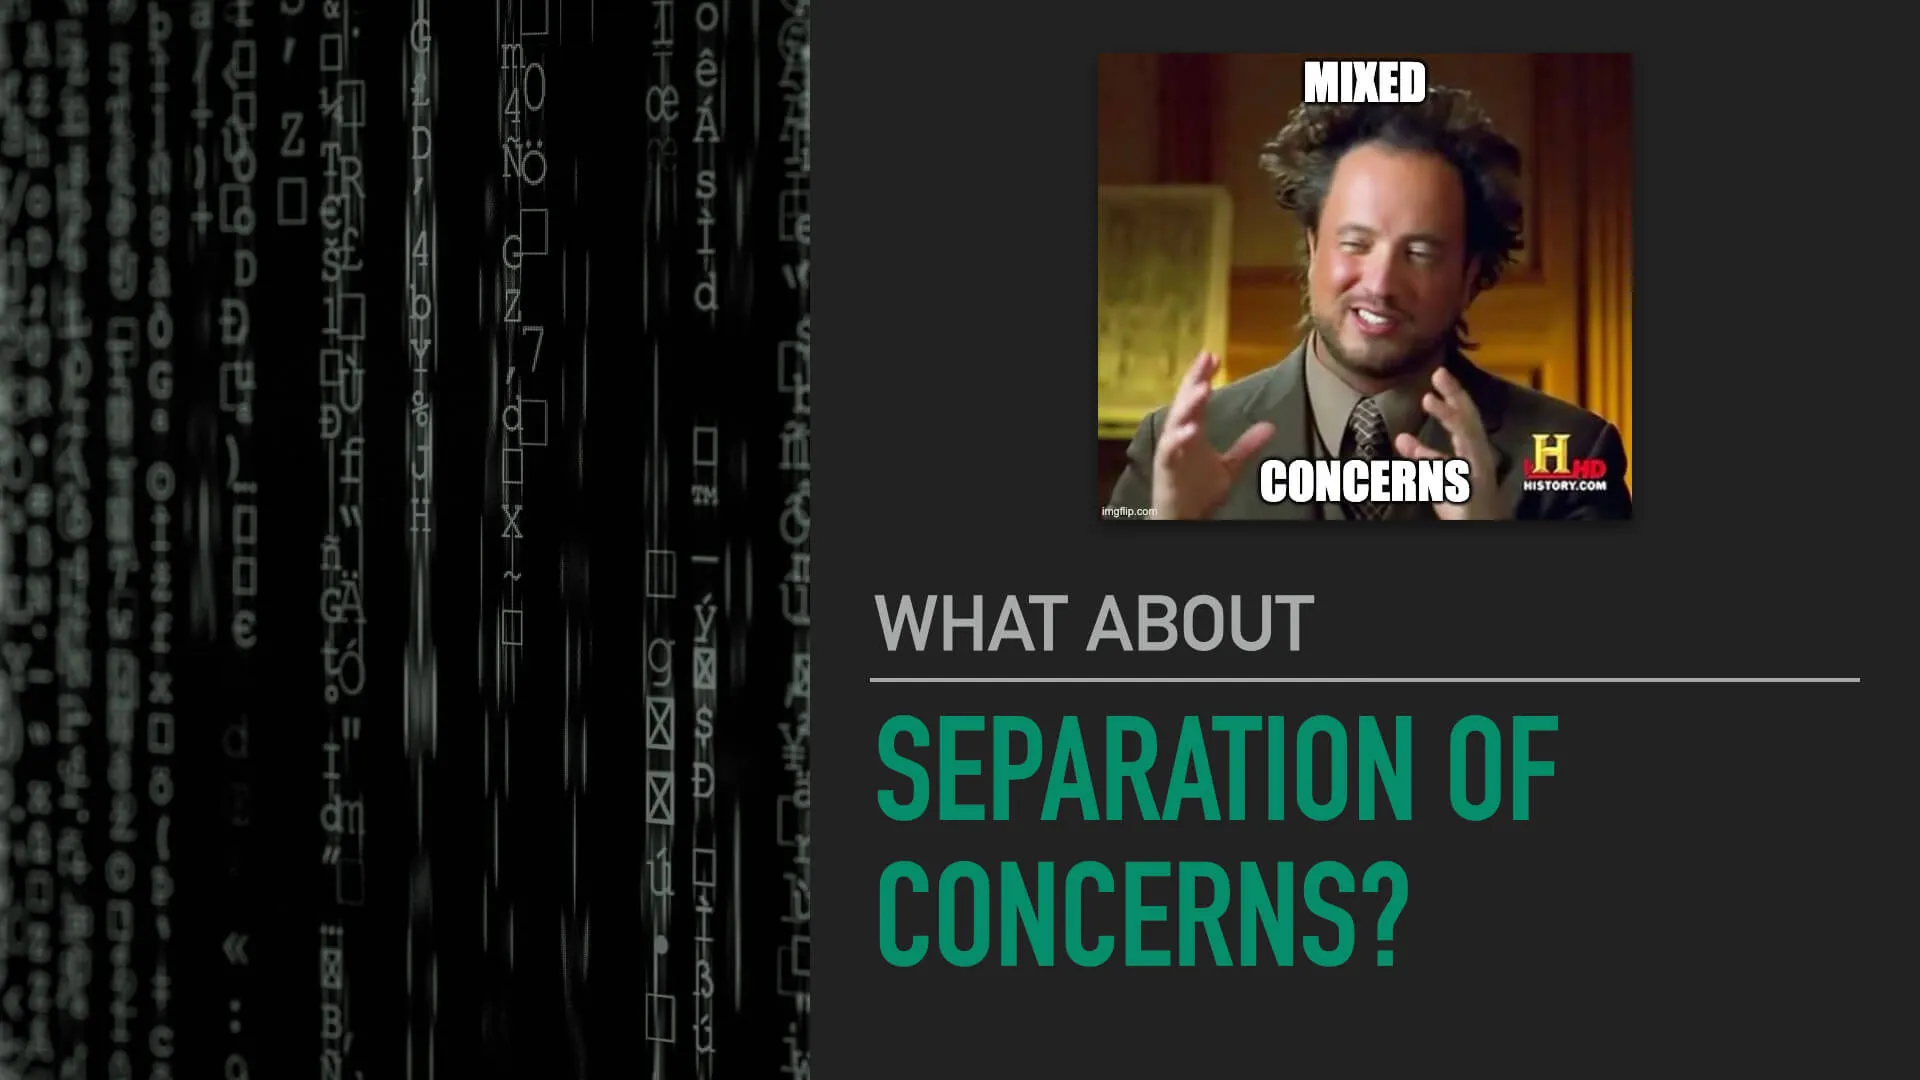 A slide that asked the question "what about separation of concerns?"